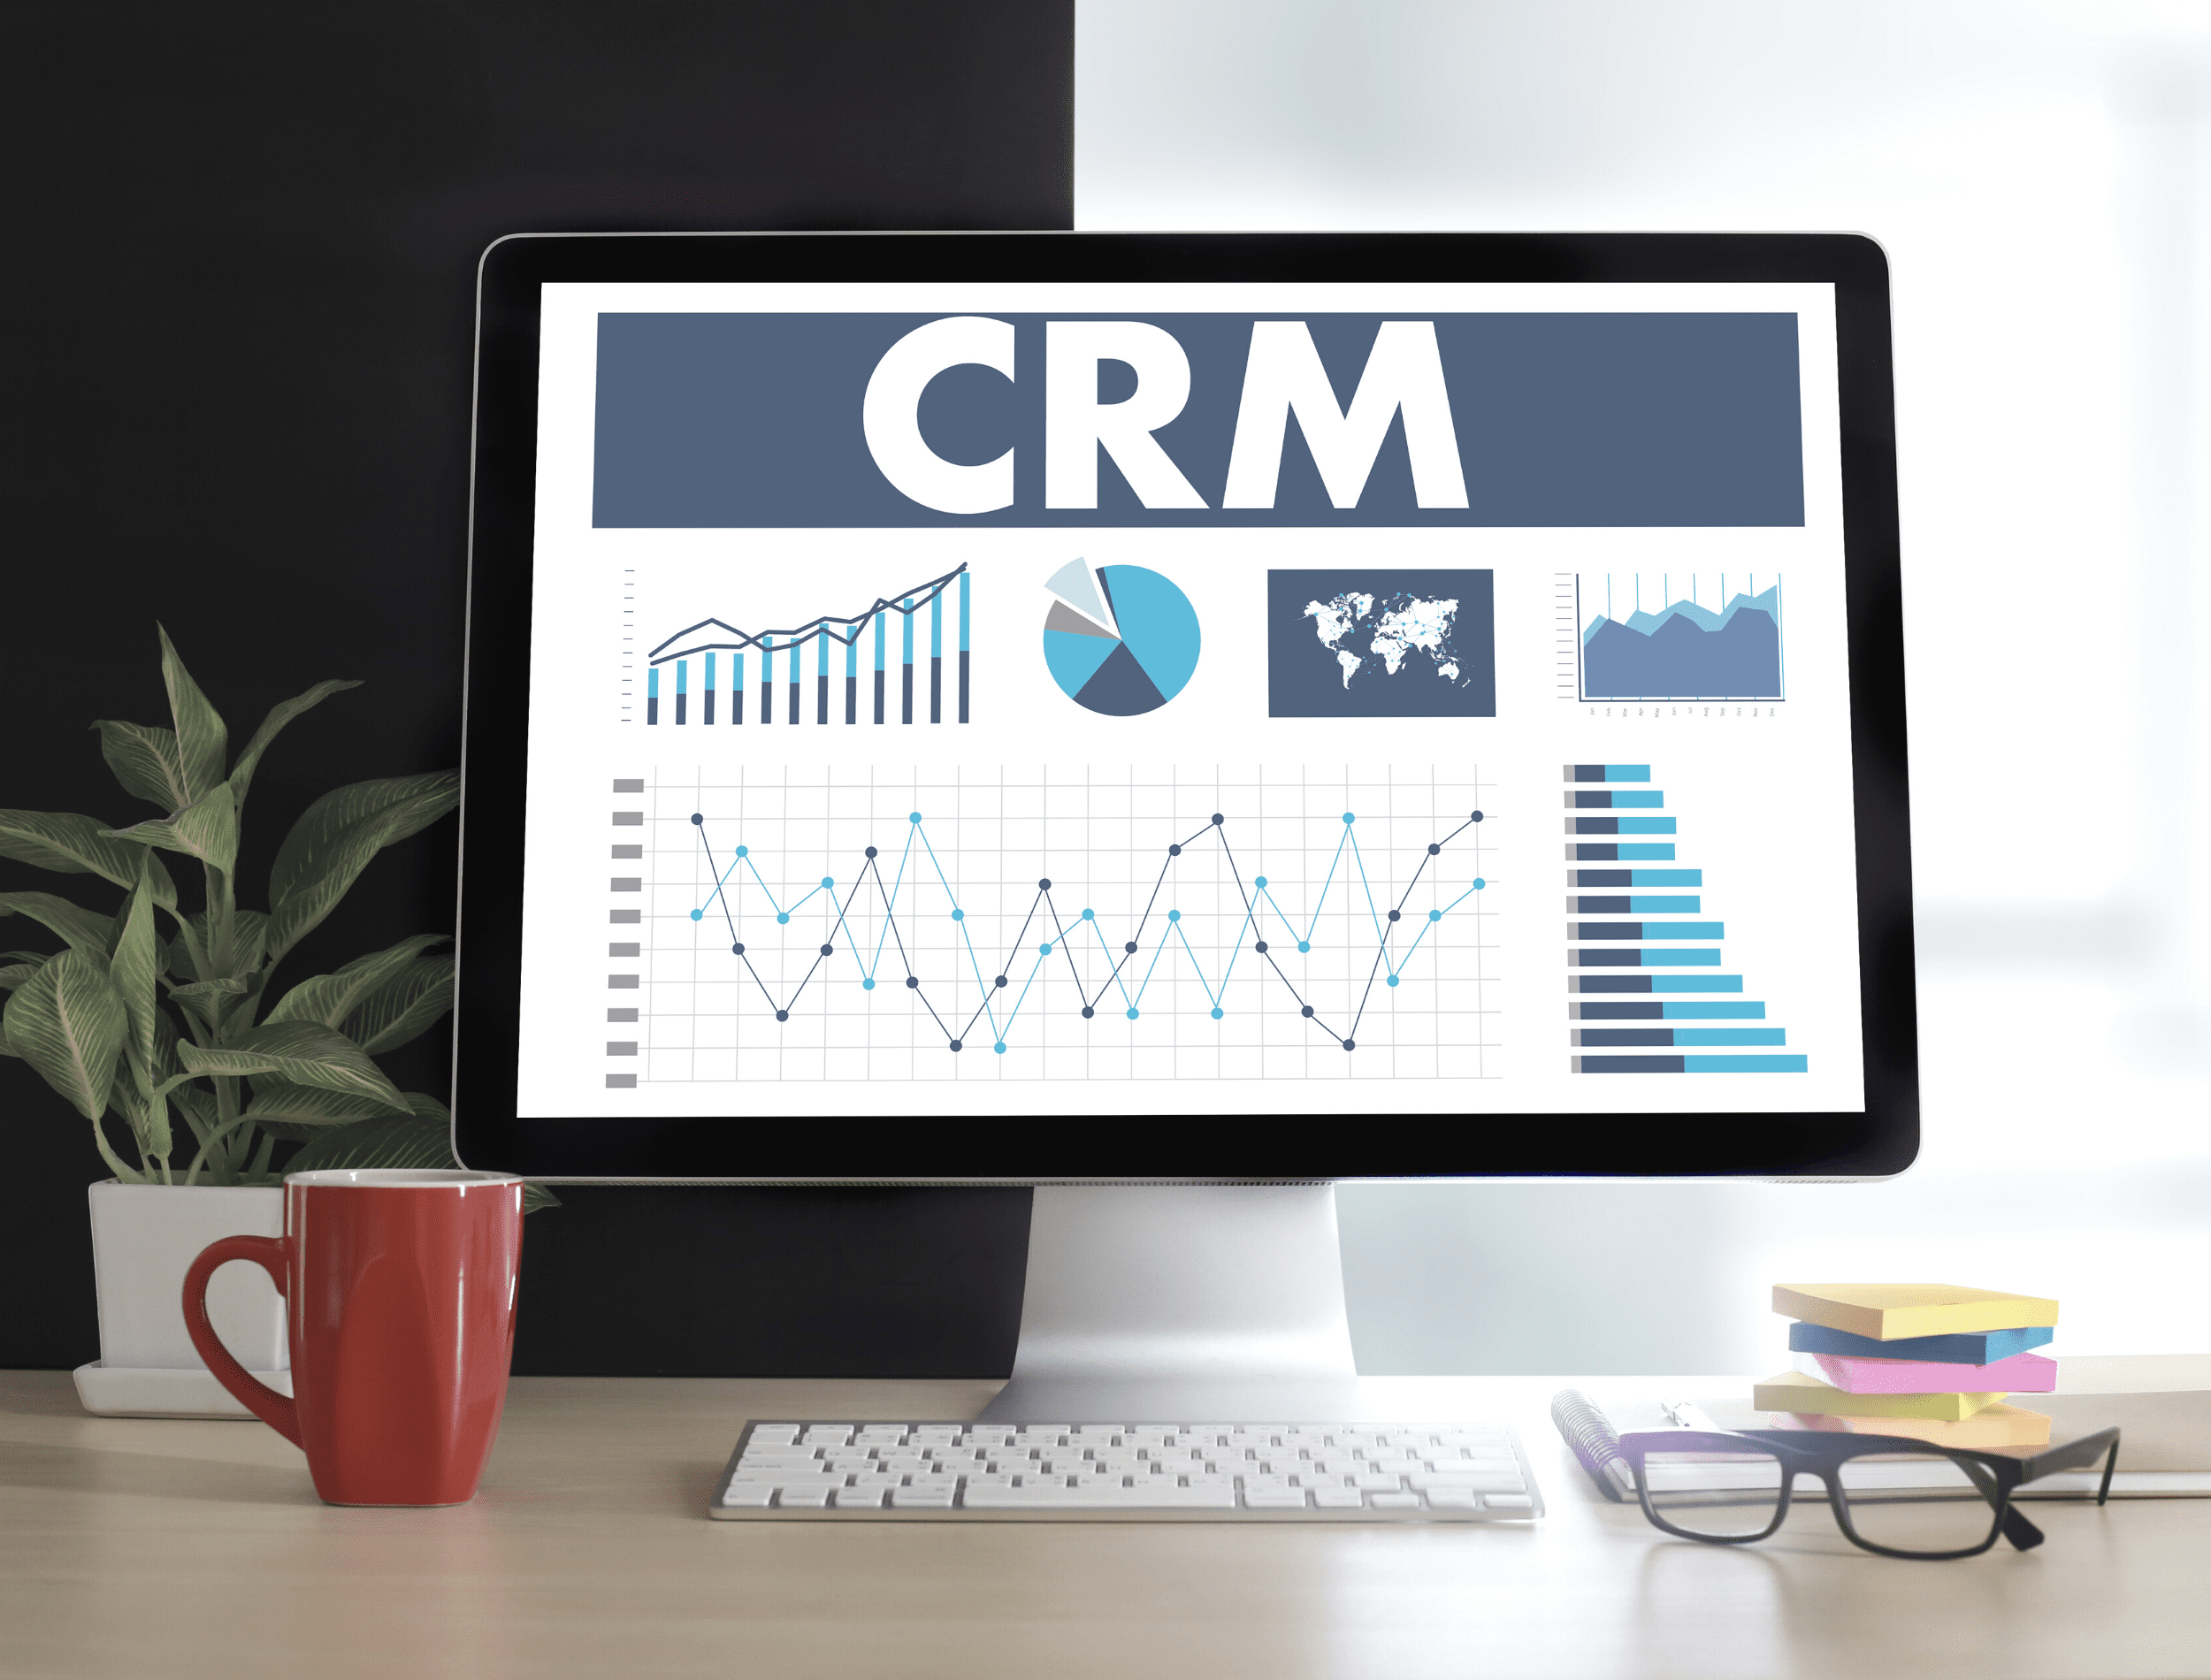 How to choose the right CRM